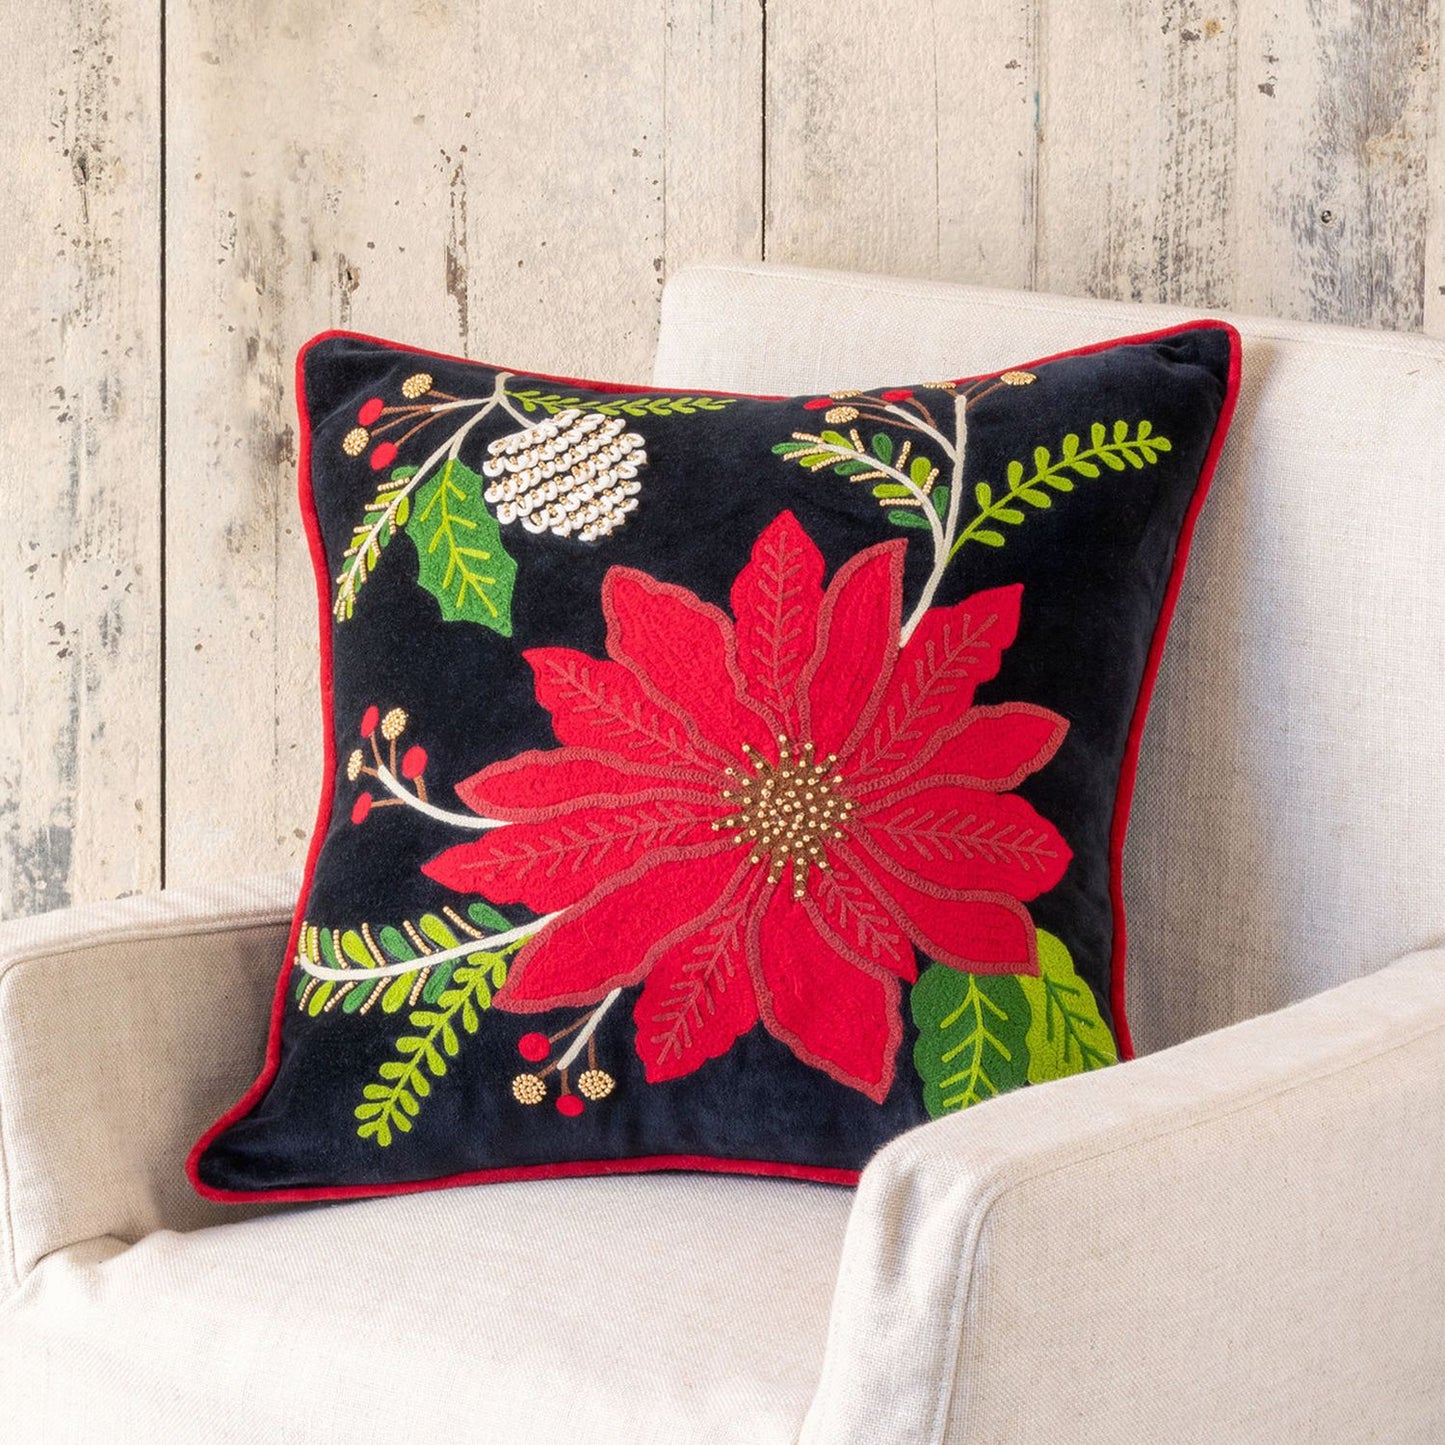 Park Hill Collection Connecticut Cheer Poinsettia Pillow